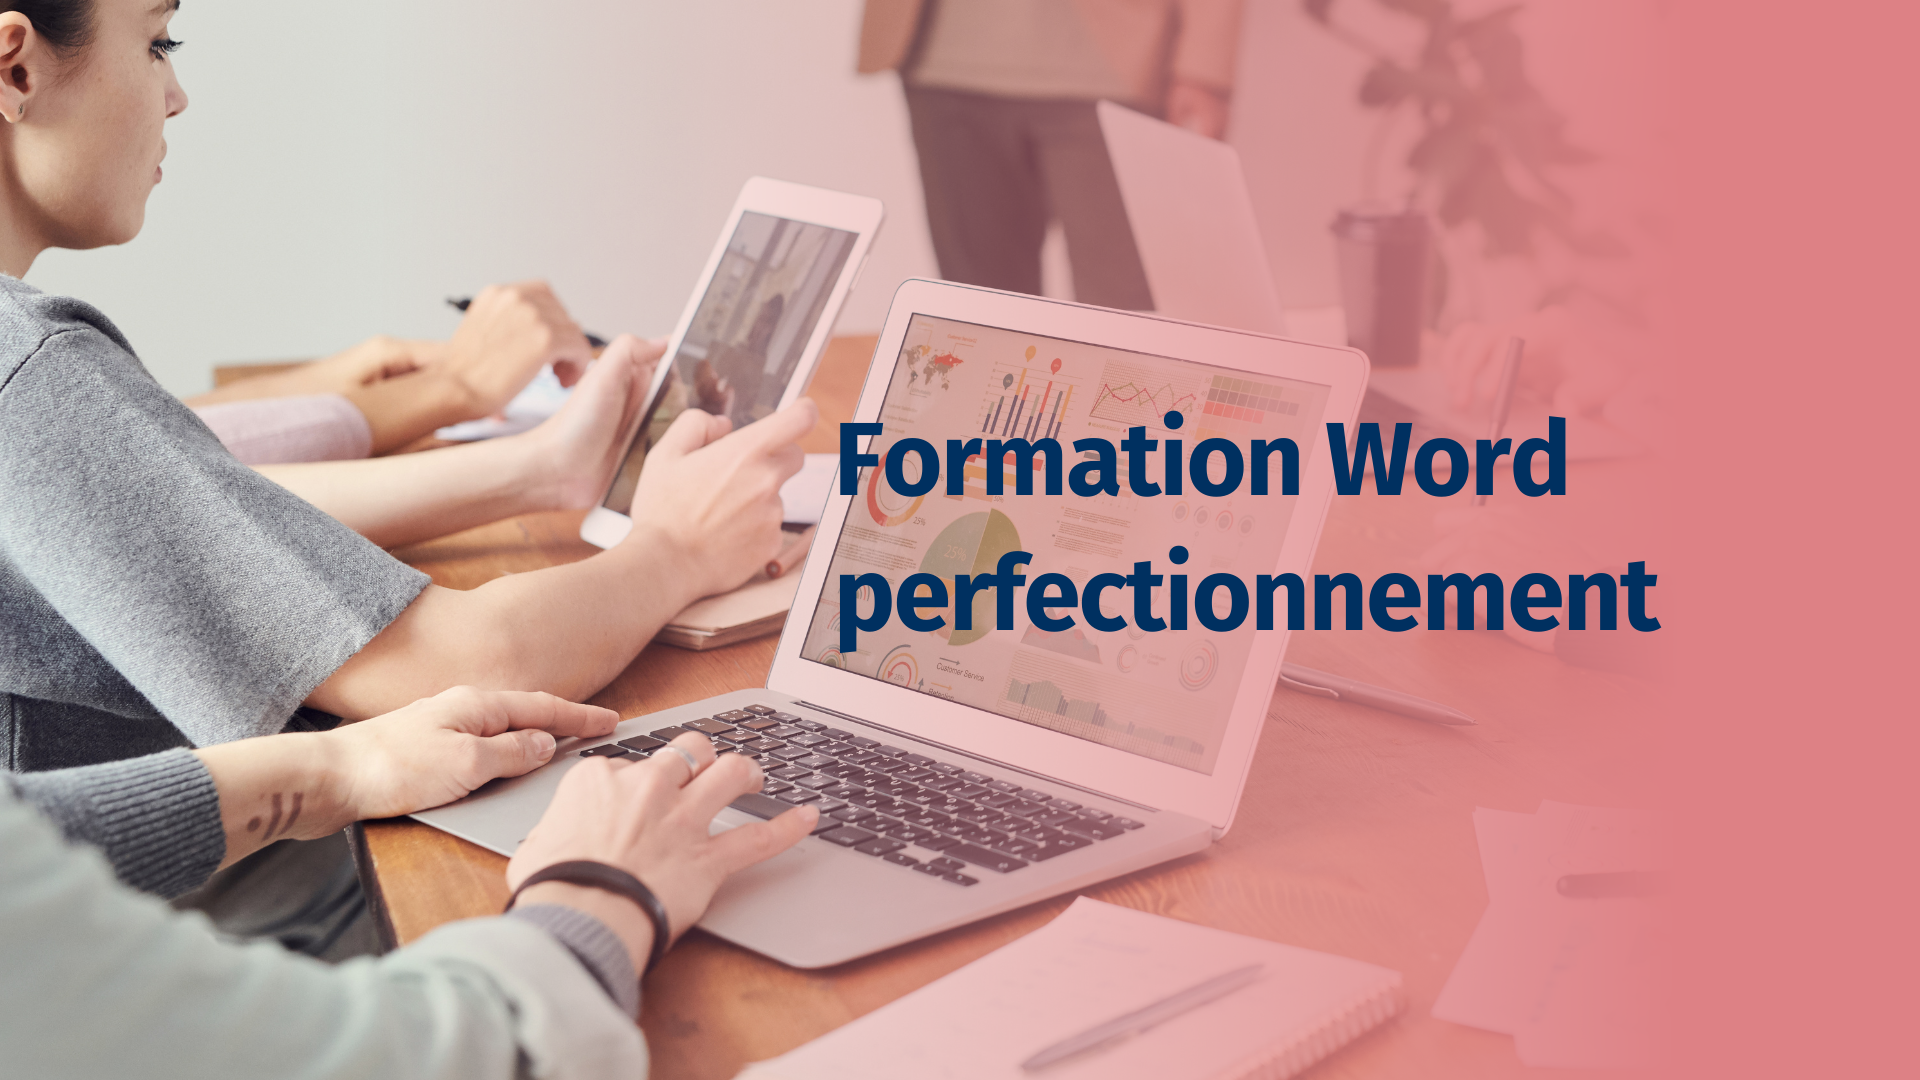 Formation Word perfectionnement